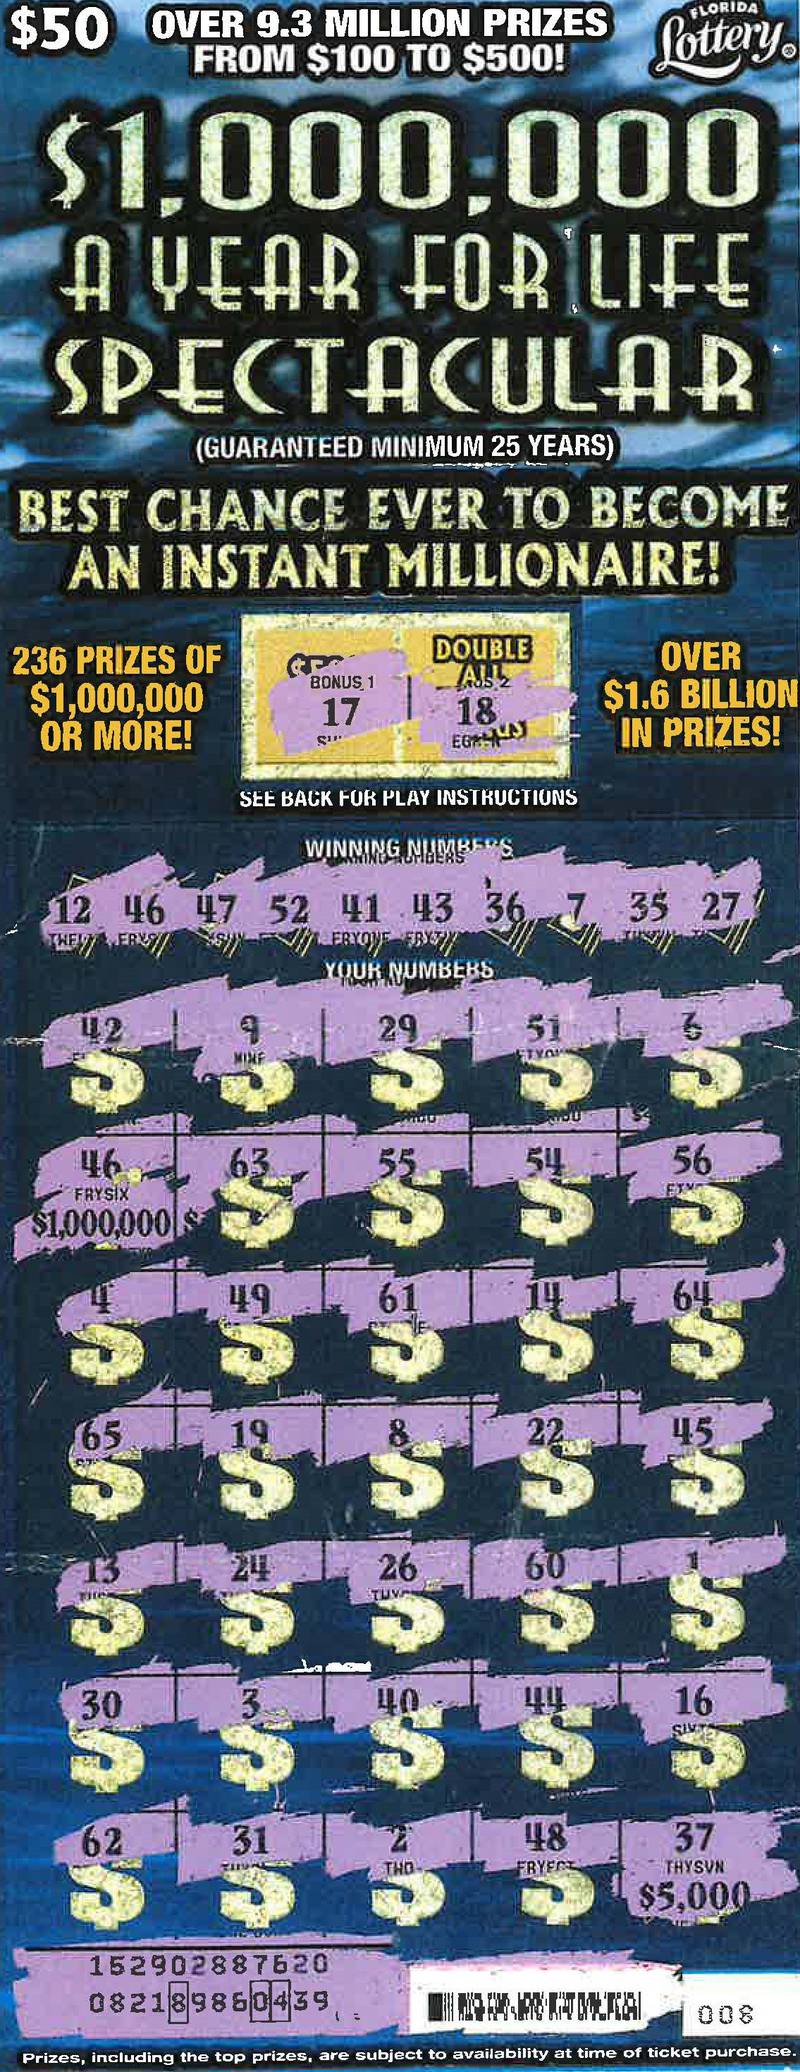 Local St. Johns woman won $1M in the scratch-off game A Year For Life Spectacular.